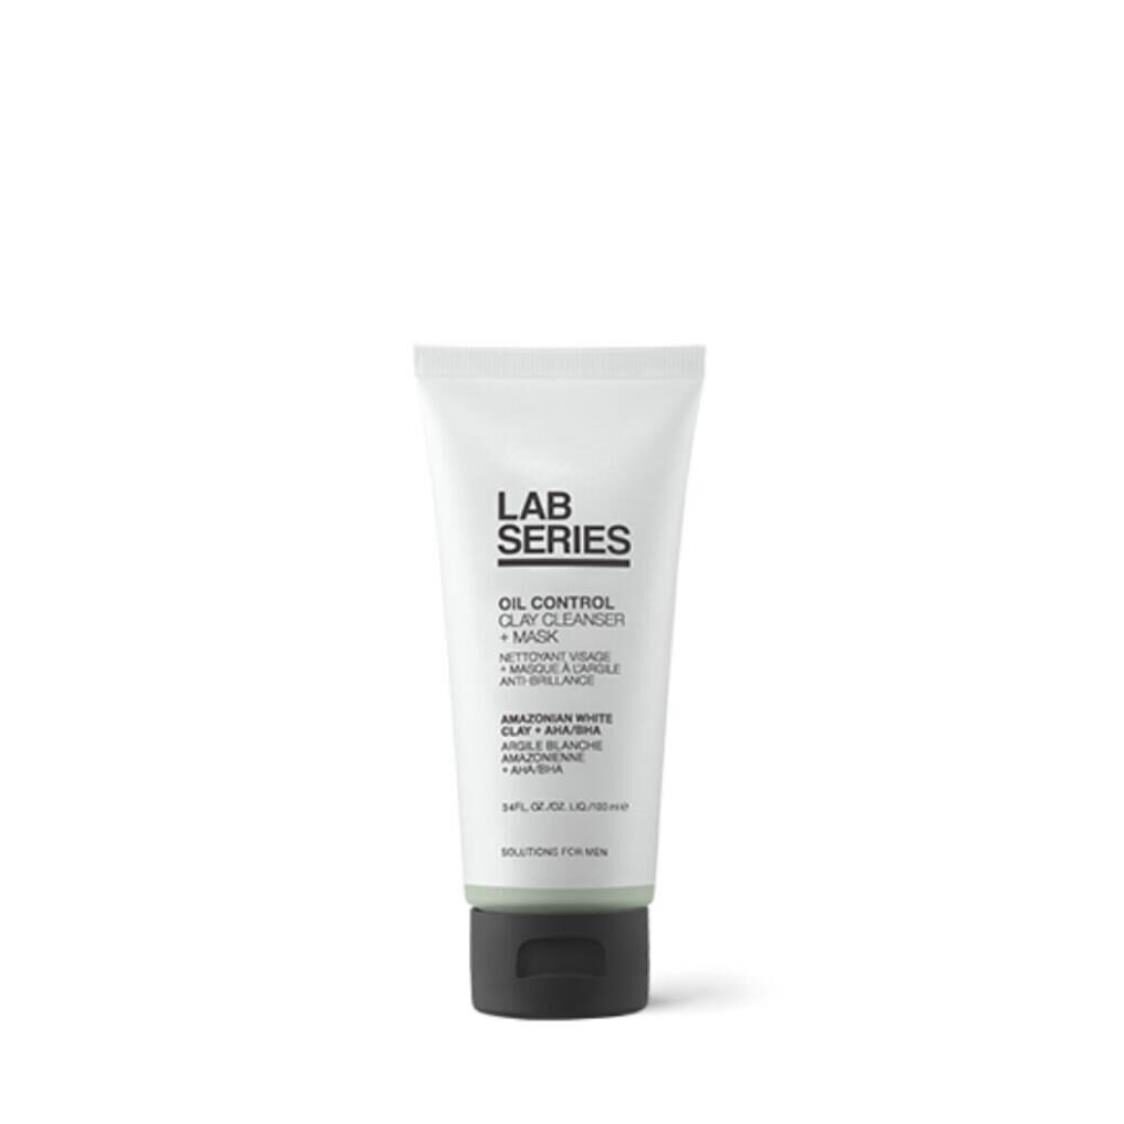 Lab Series Oil Control Clay Cleanser  Mask 100ml